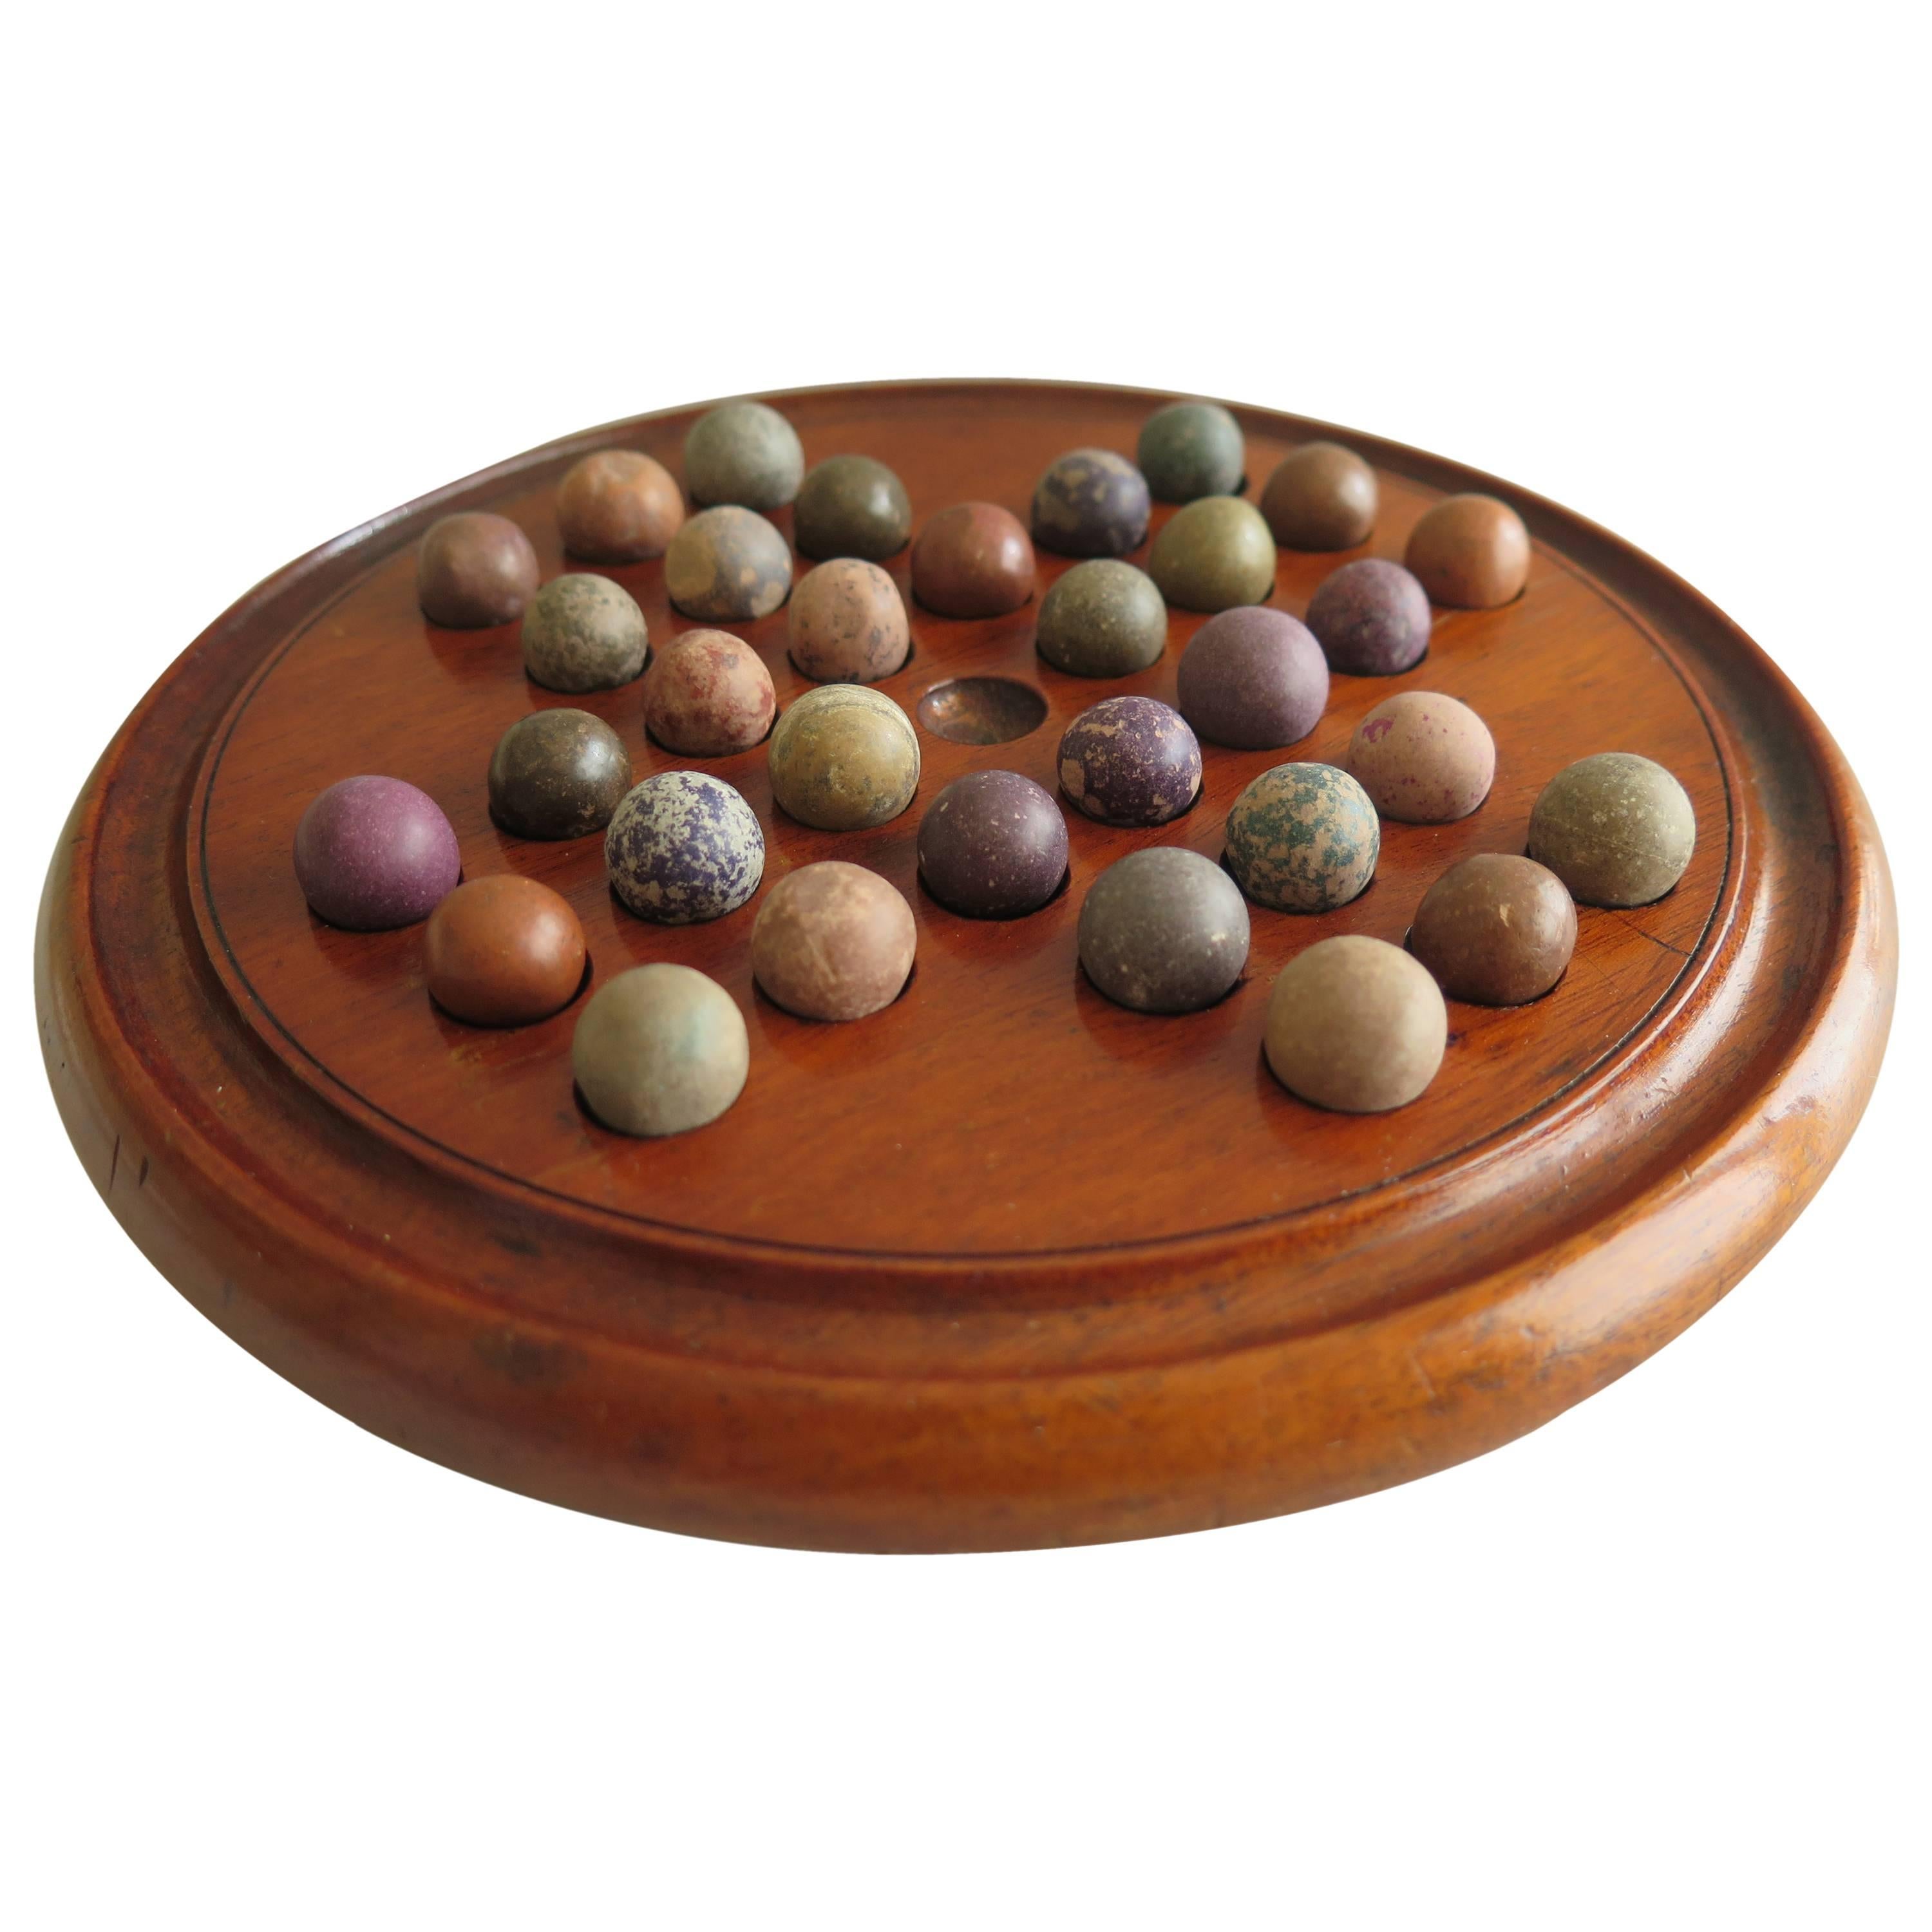 19th Century, Solitaire Marble Board Game, with 32 Handmade Marbles, circa 1880